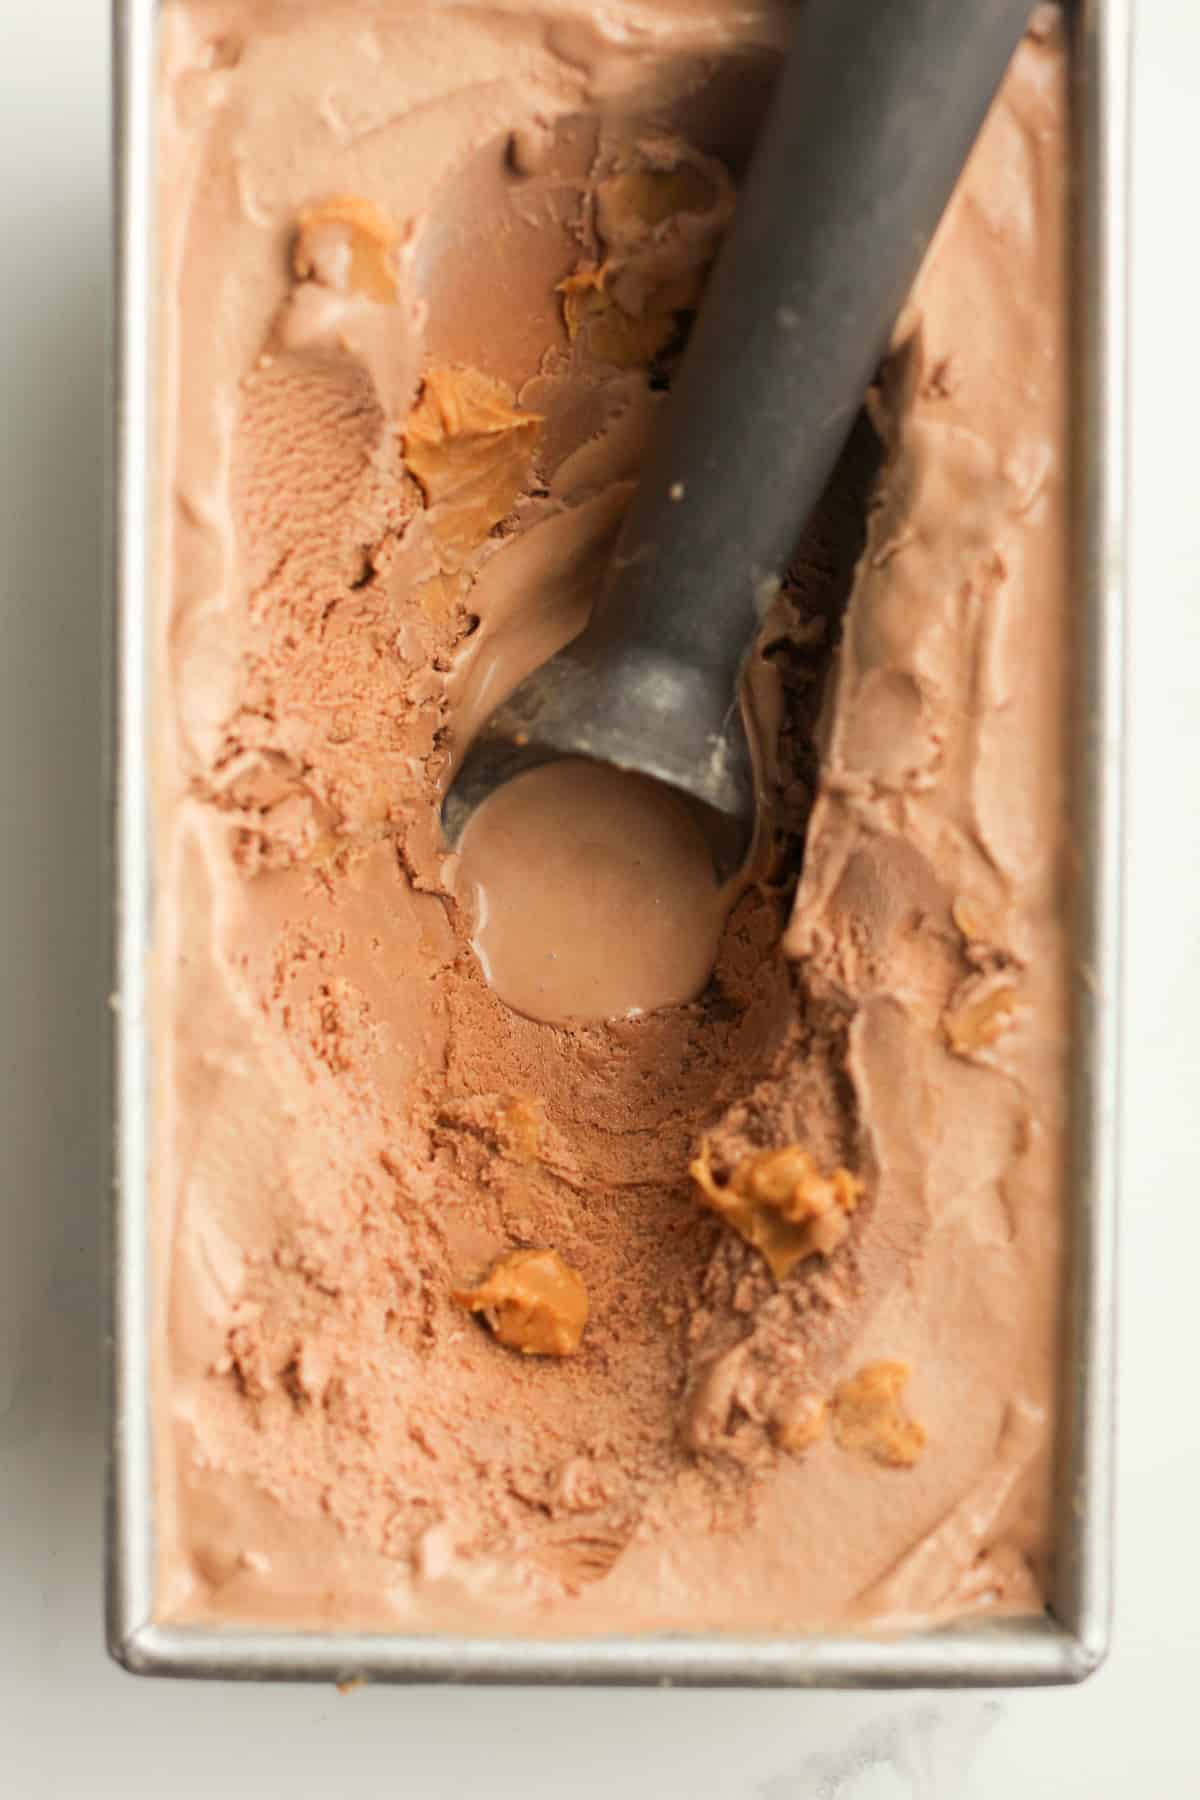 Closeup of a pan of chocolate peanut butter ice cream, with a scooper.